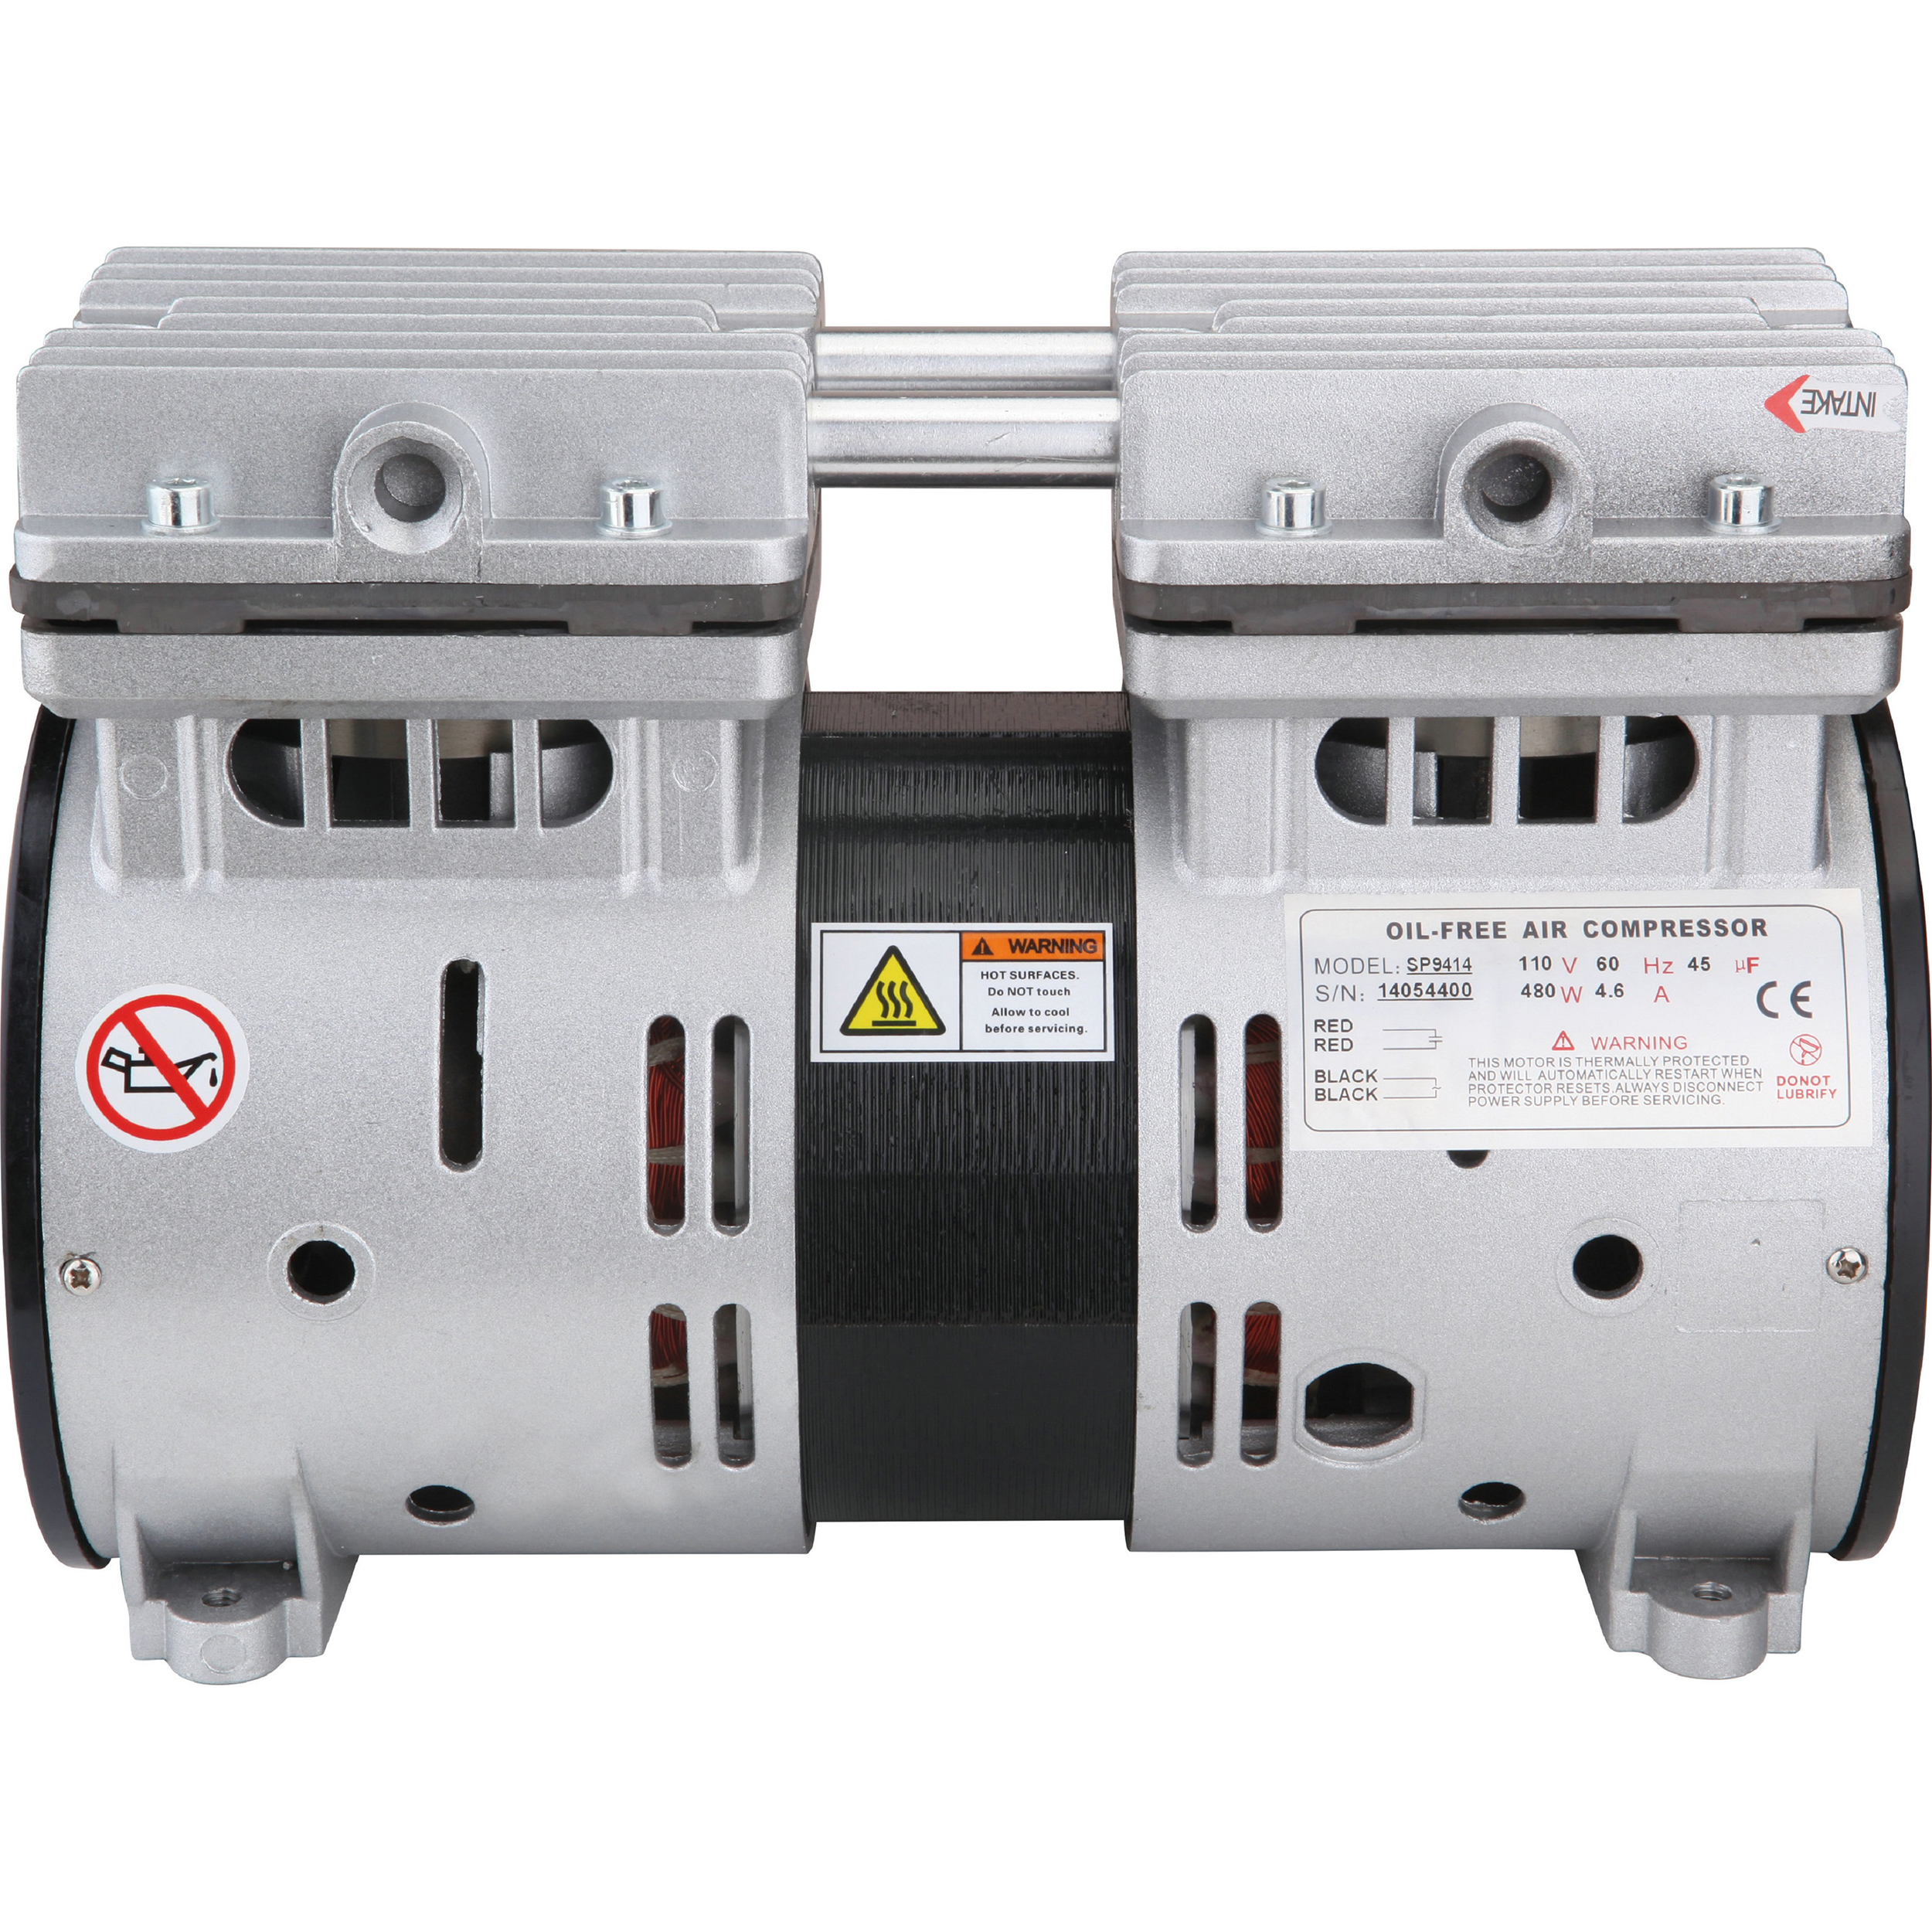 Sp-9414 3/4 Hp Ultra Quiet And Oil-free Air Compressor Motor